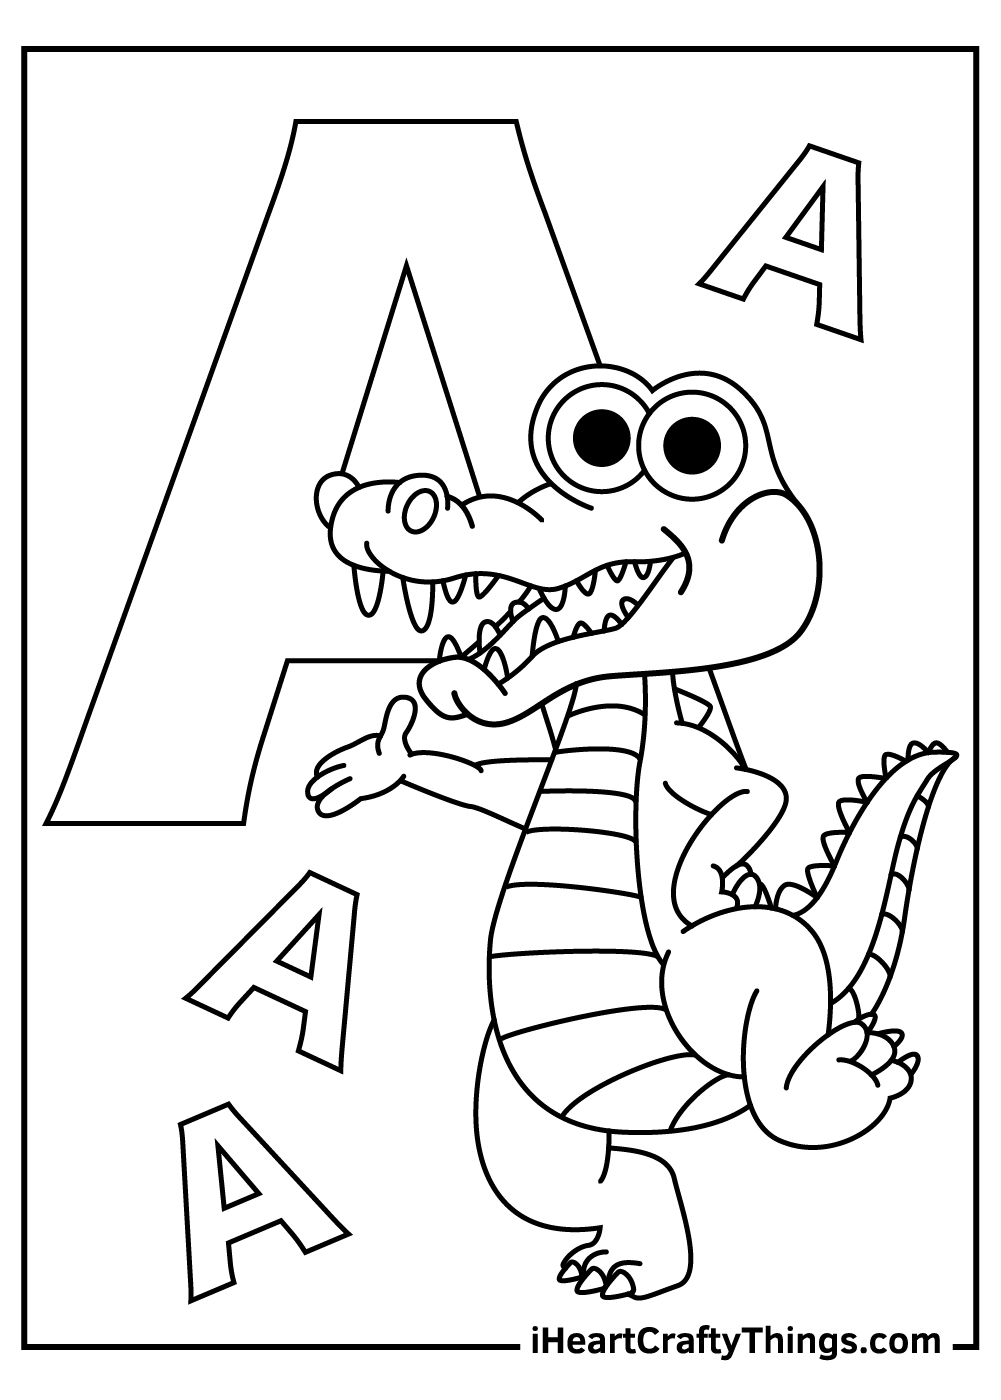 Free Coloring Pages For 3 Year Olds